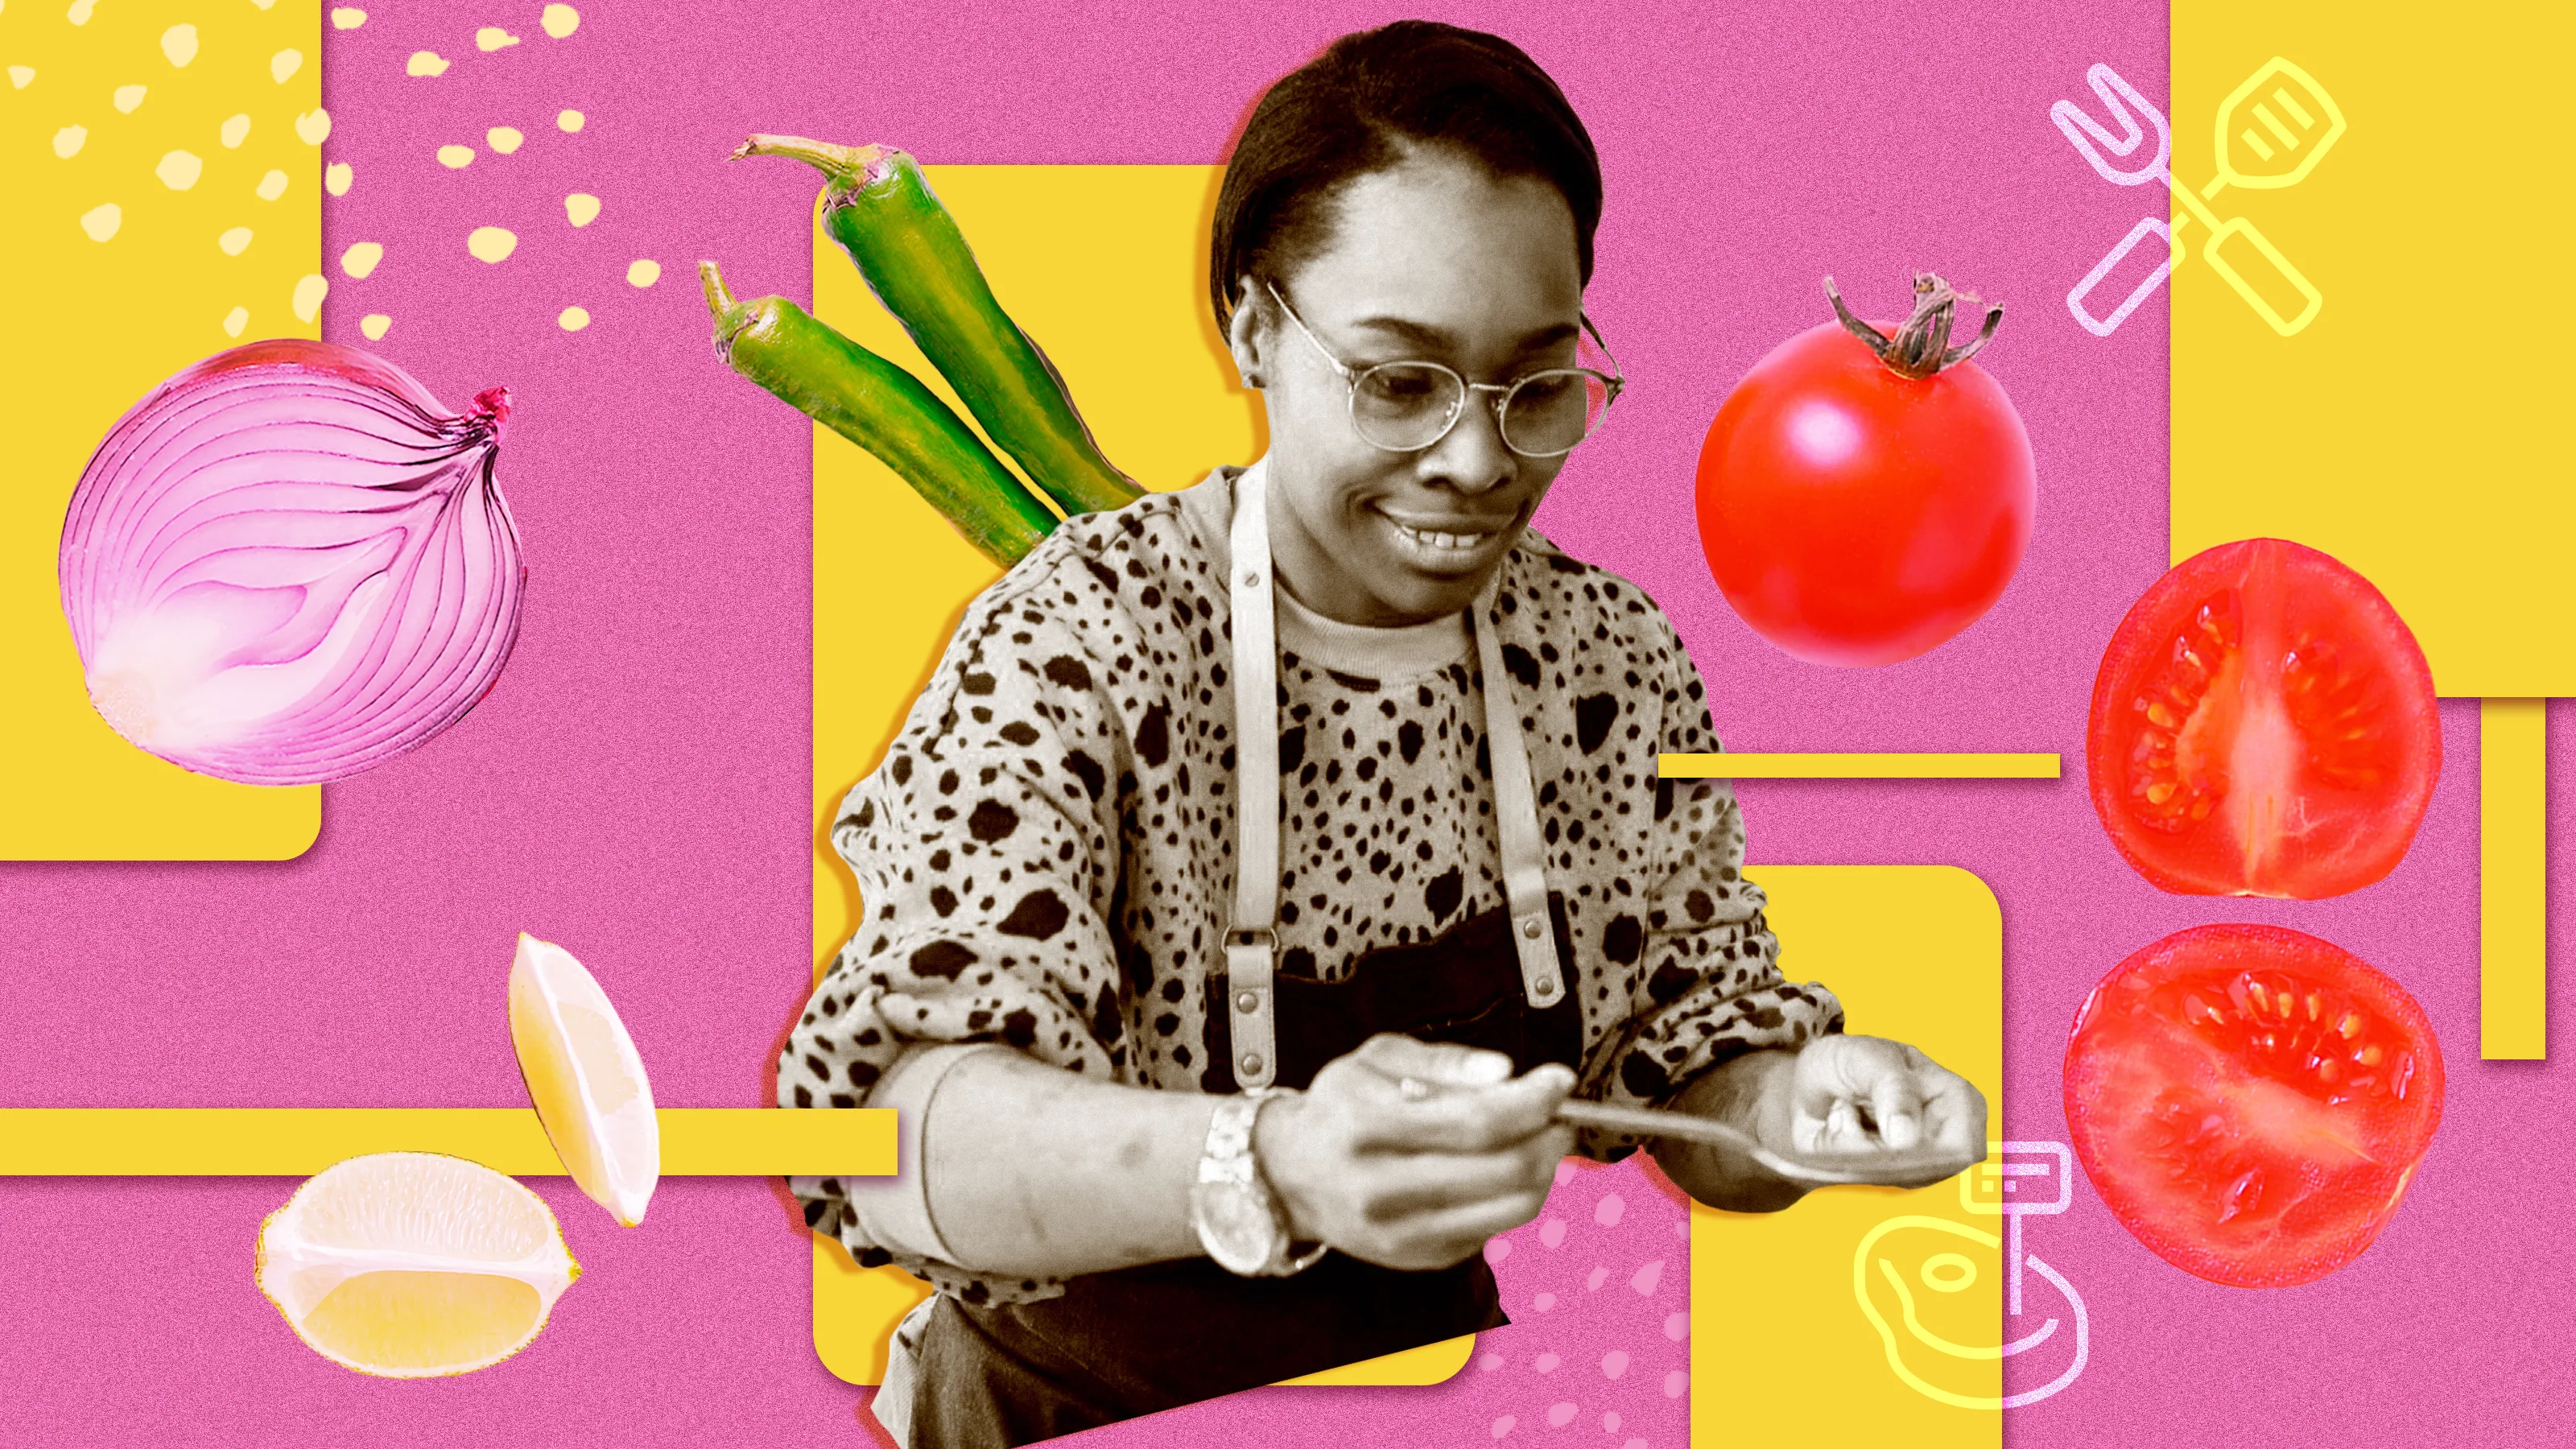 Meet the makers, farmers and chefs who are redefining American